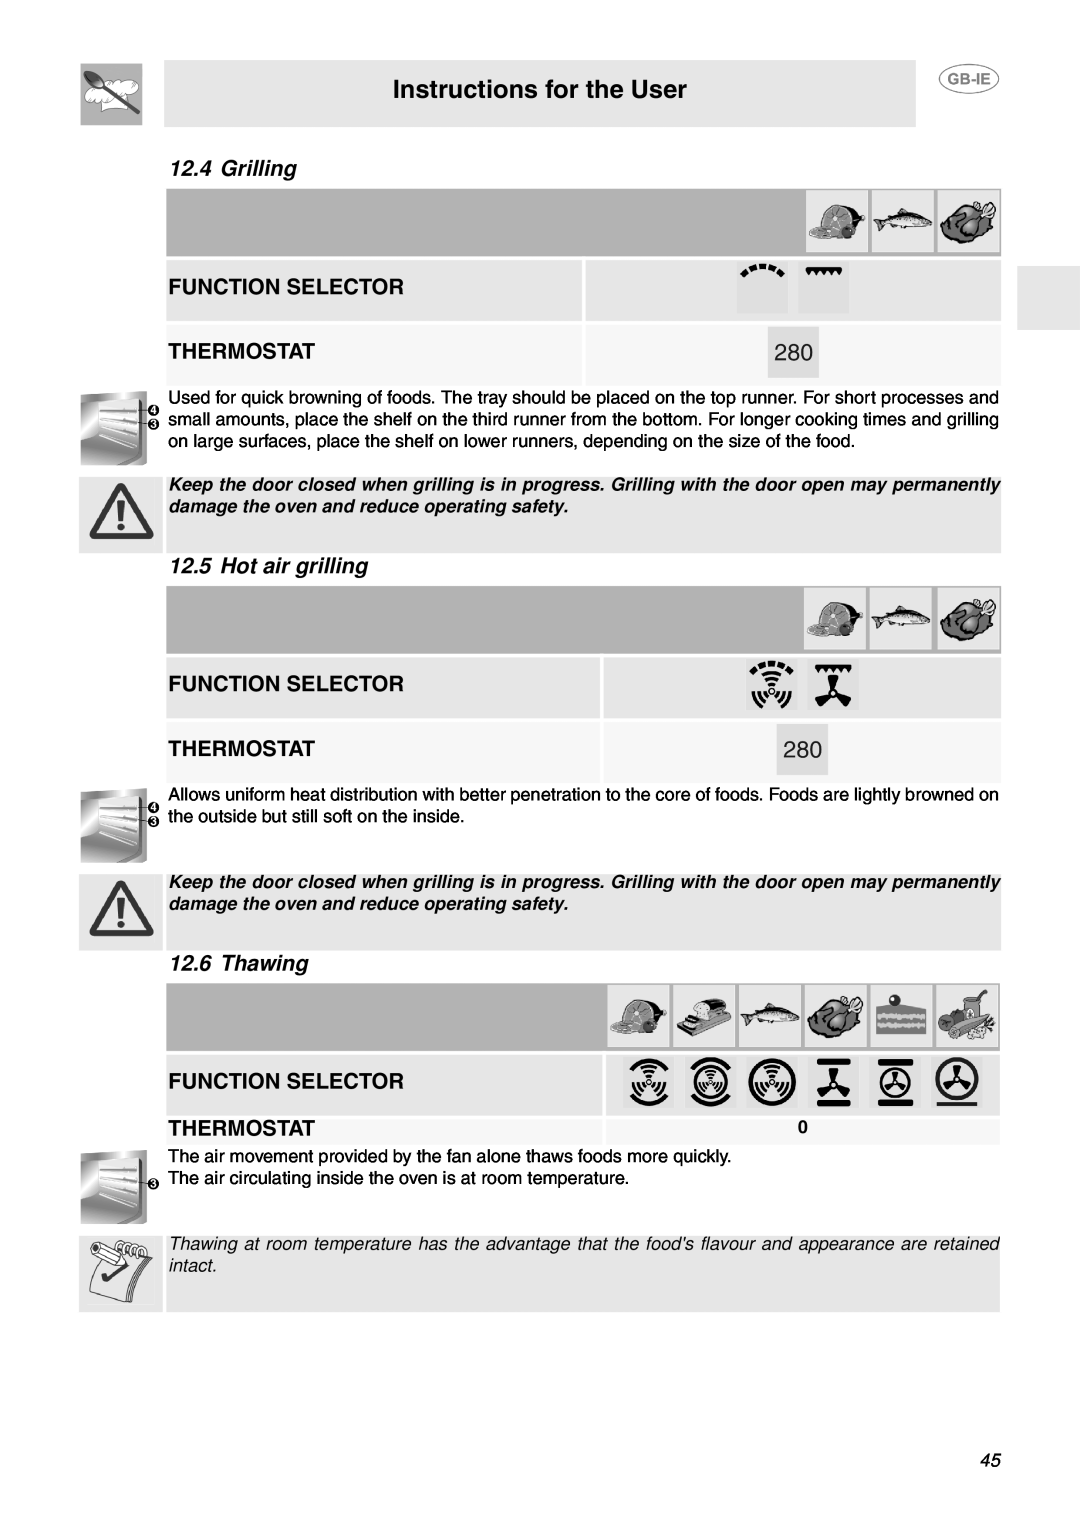 Smeg FP130B, FP130N, FP130X Grilling, Function Selector Thermostat, Hot air grilling, Thawing, Instructions for the User 